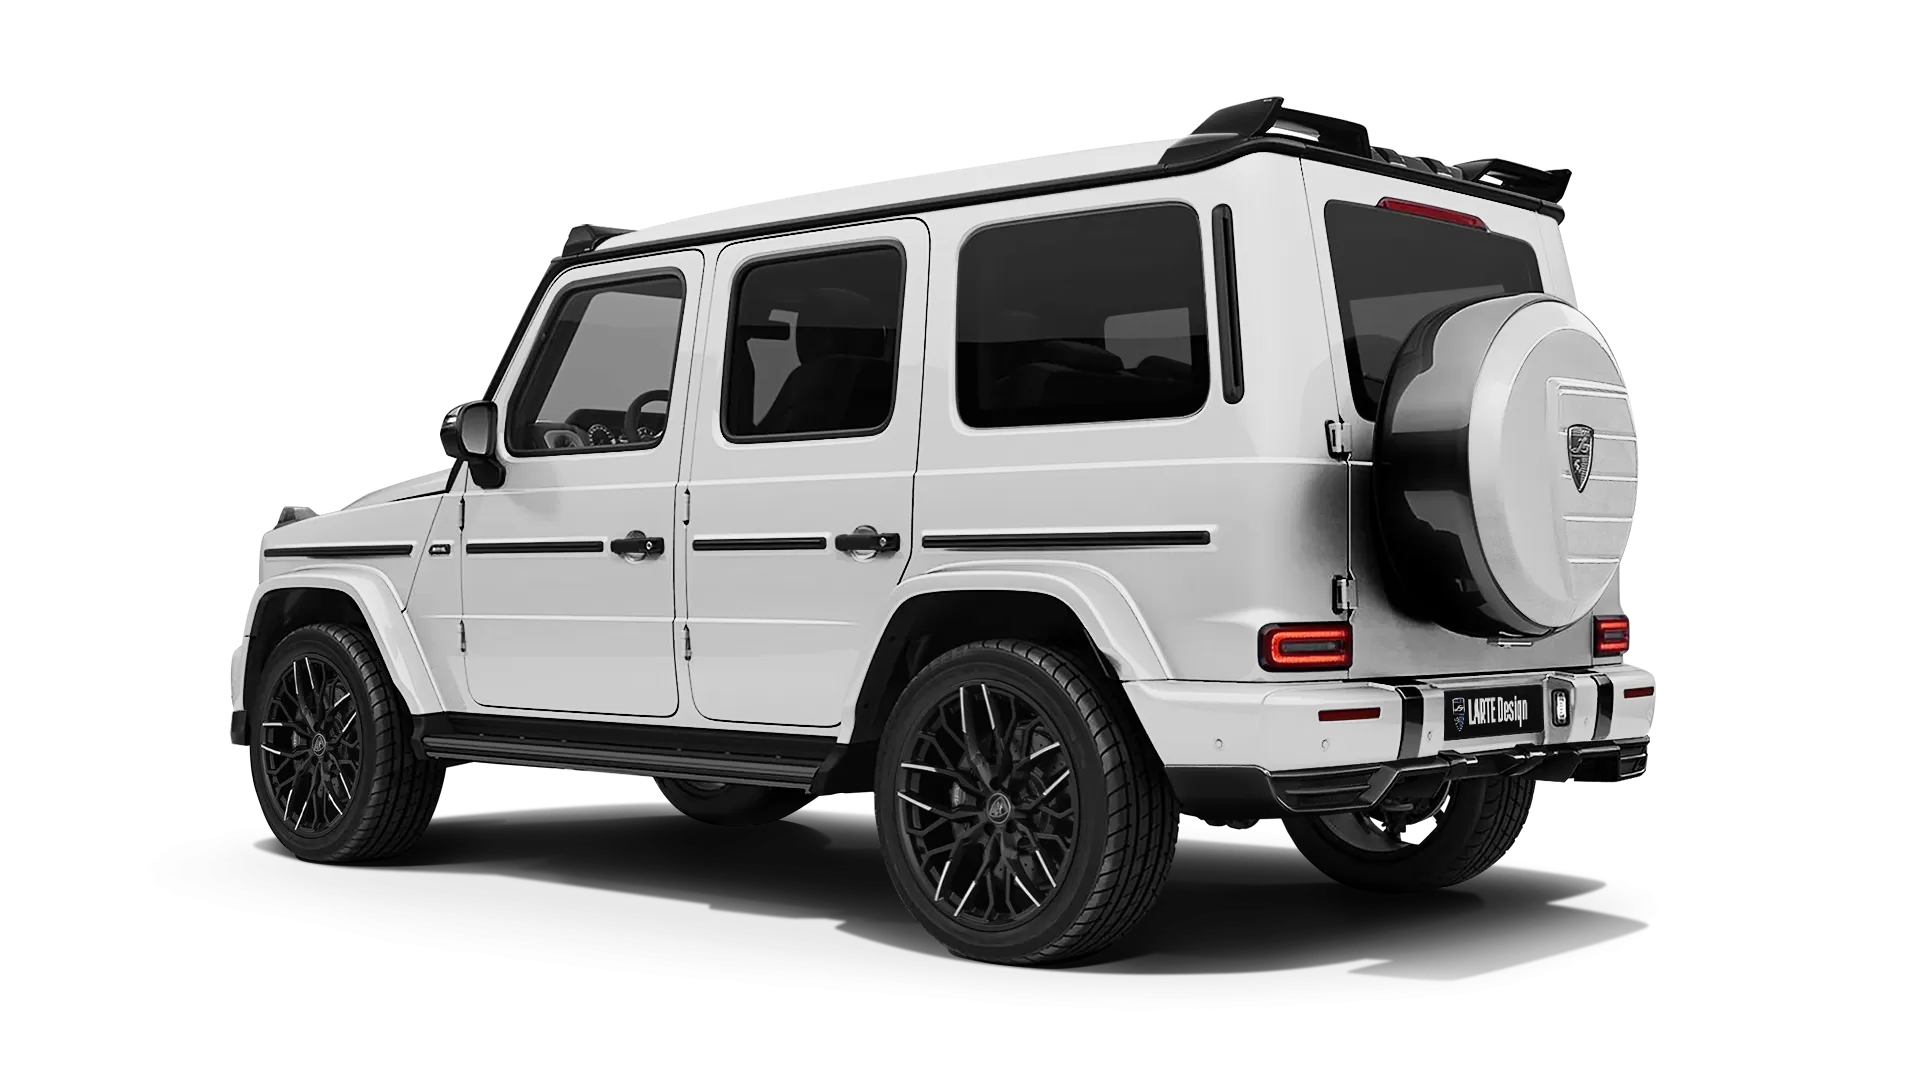 Mercedes G class W463 with painted body kit: rear view shown in Polar White